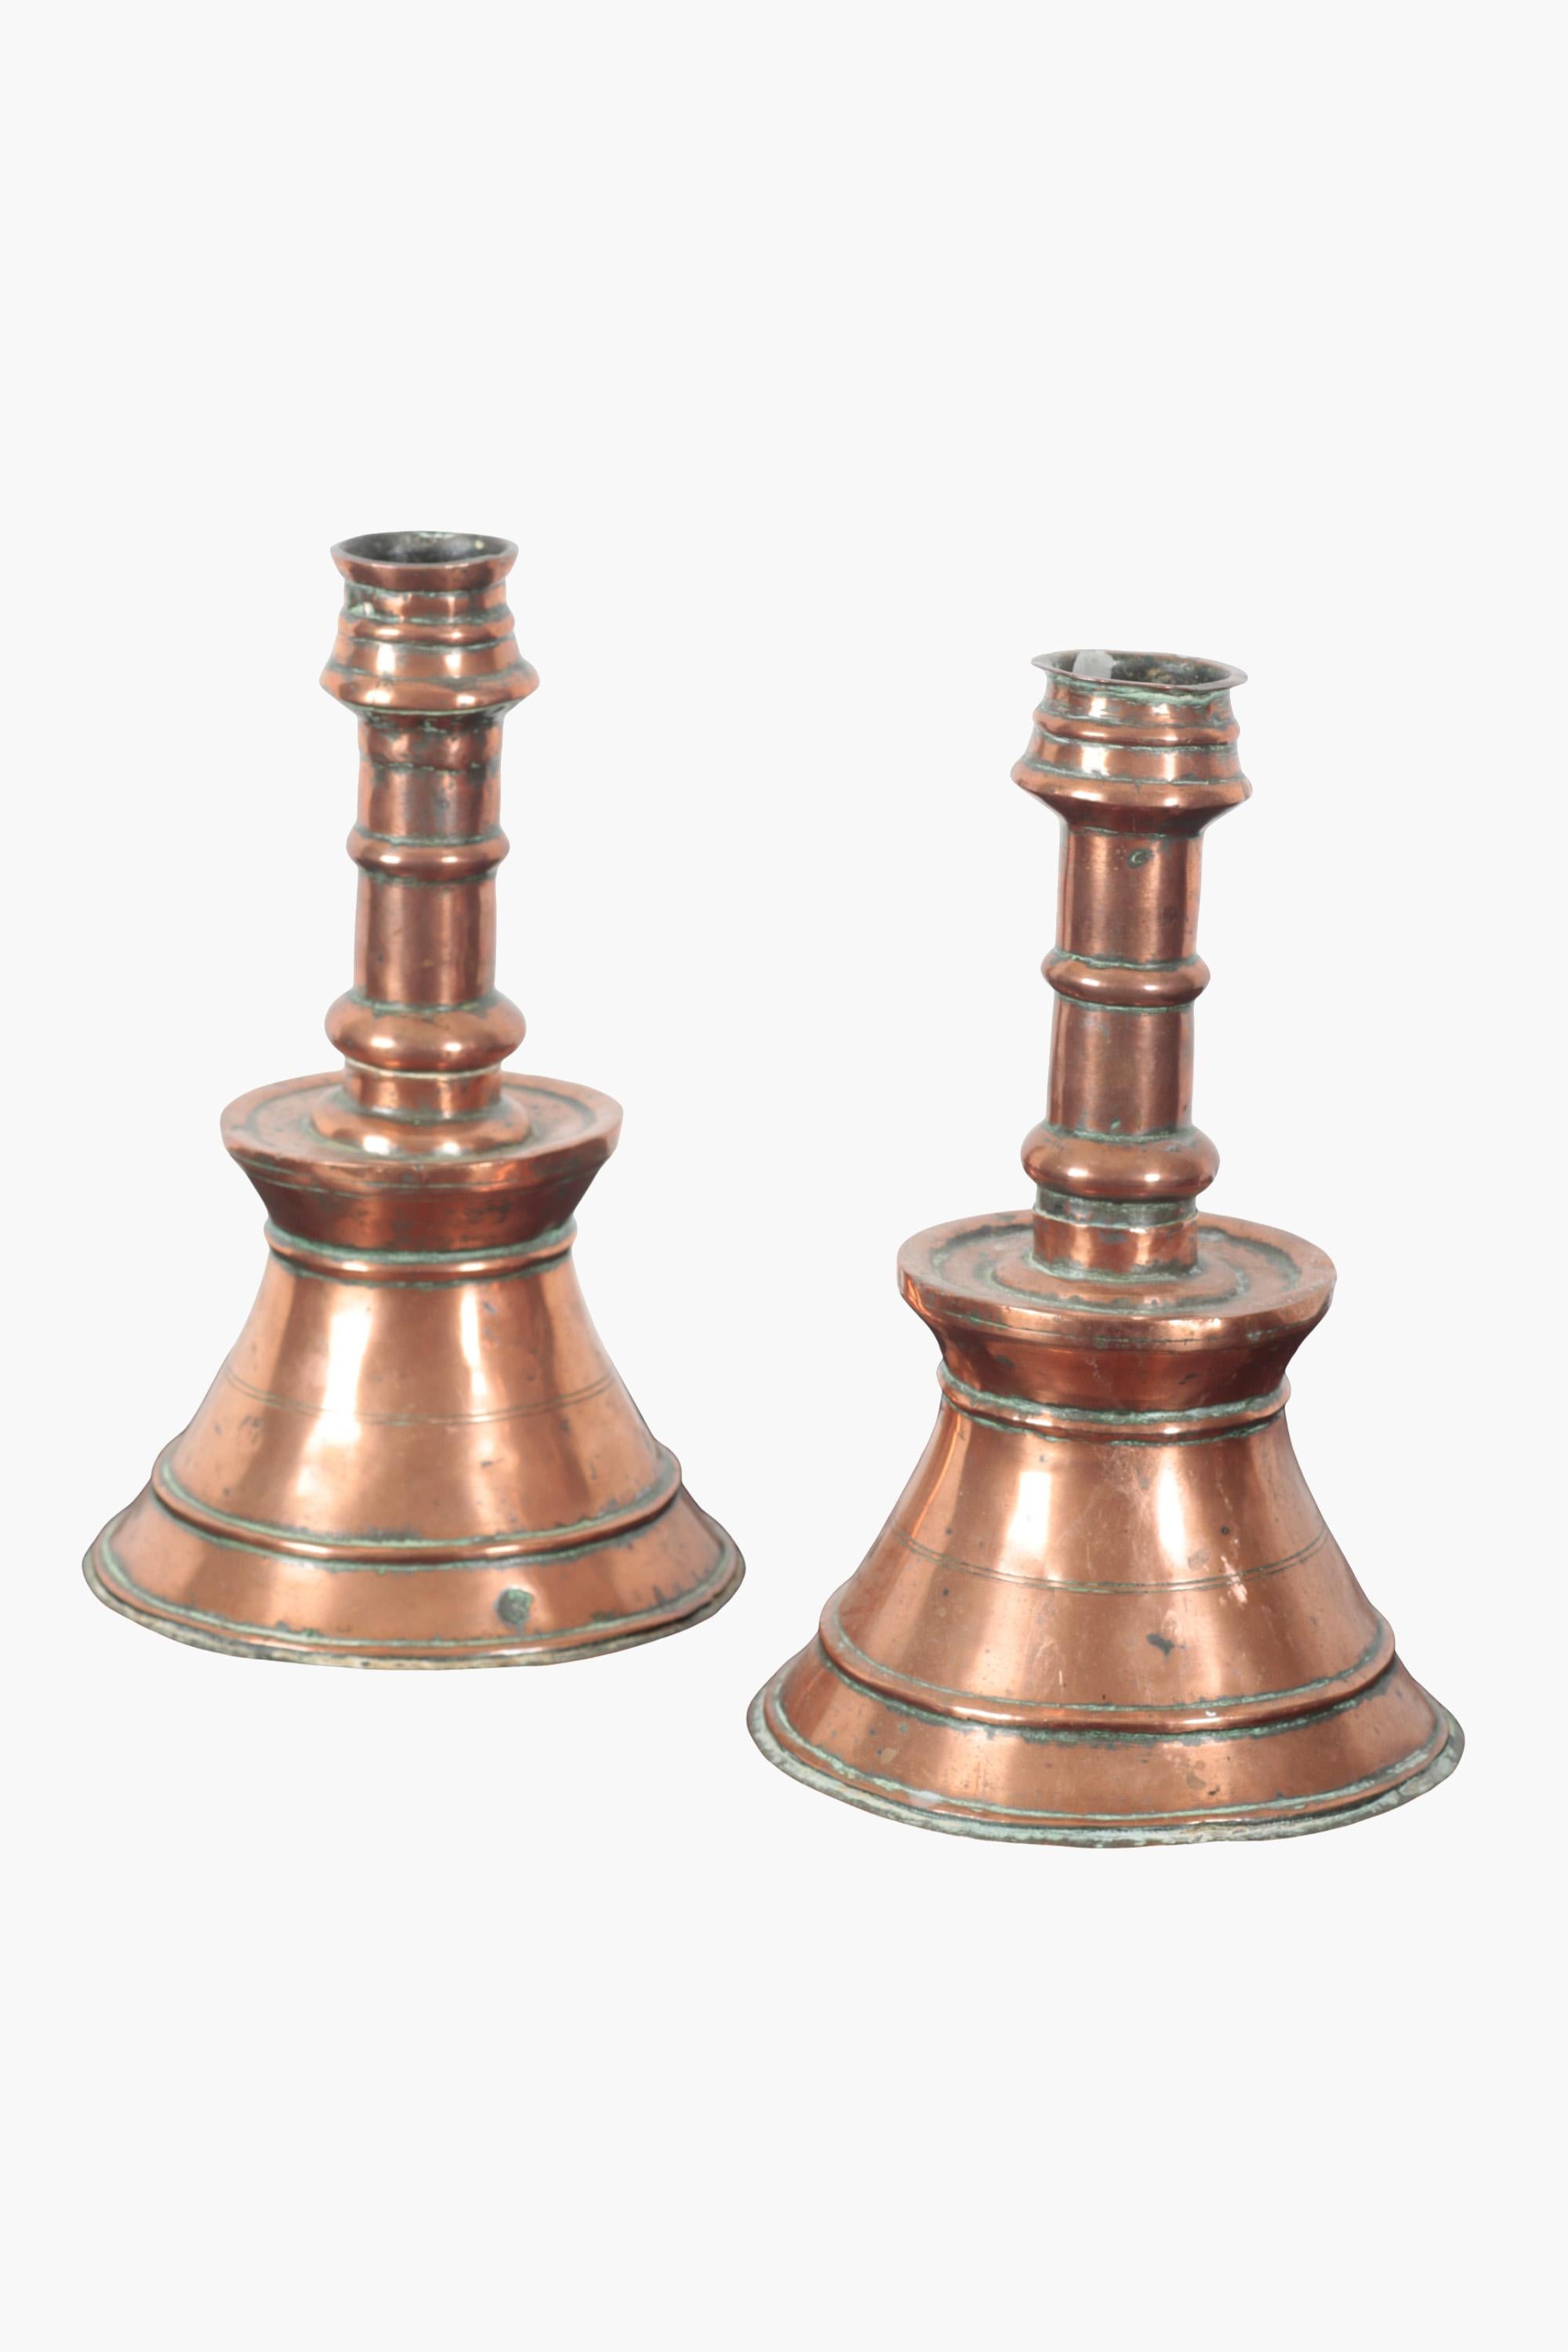 Two copper candlesticks of typical ottoman form with turned stems on a stepped and tapered base. Each base rises to a flared bobèche (a drip tray to collect melted wax).

Made in the 19th century, based on 15th and 16th century designs, when this